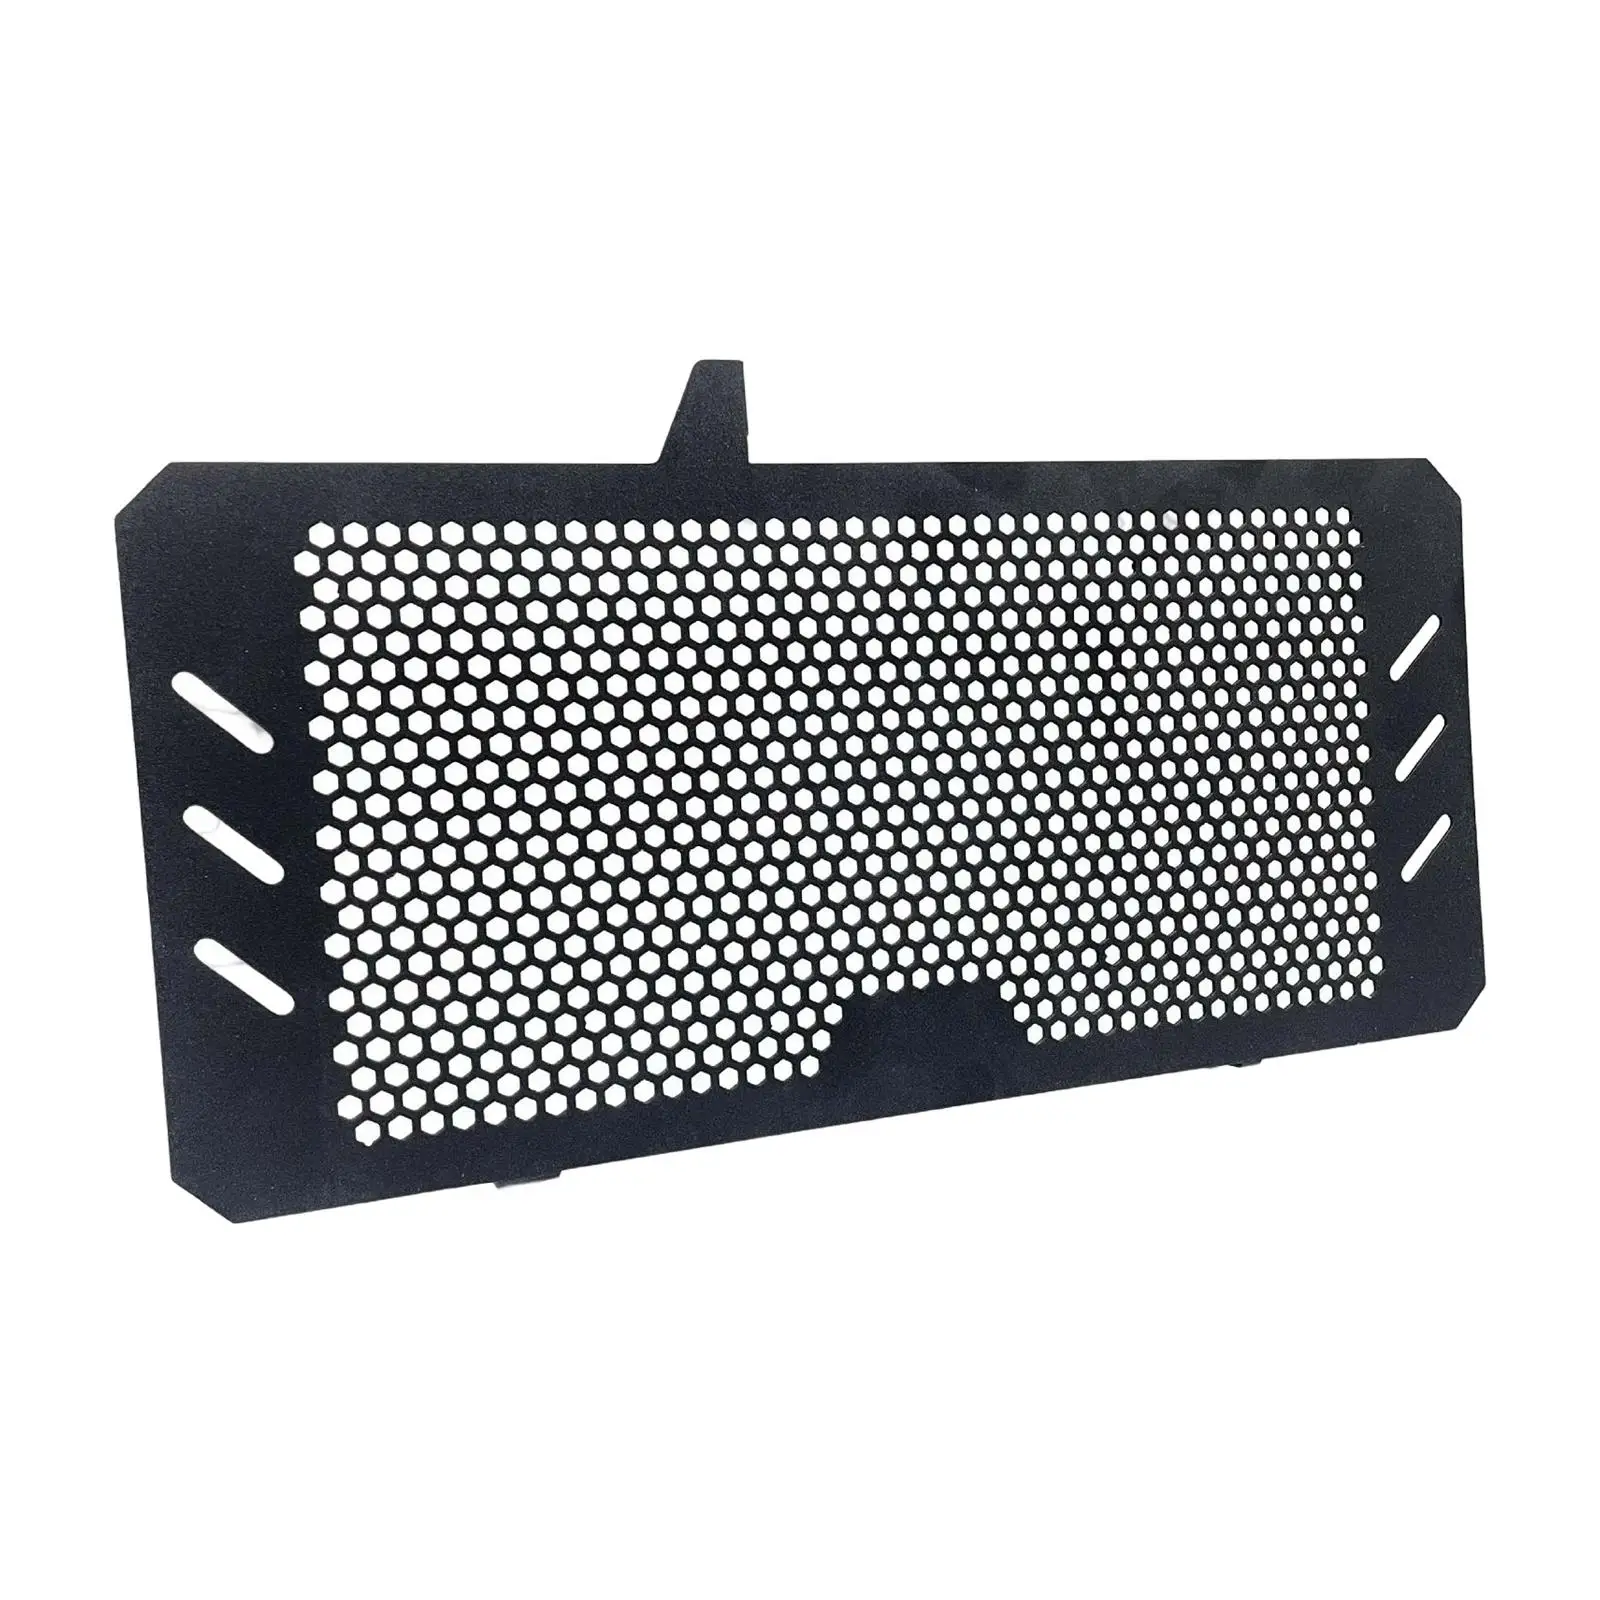 Motorbike Motorcycle Grille Guard Protector Cover, Protective Grill for NC750 S / X Aluminum Alloy.